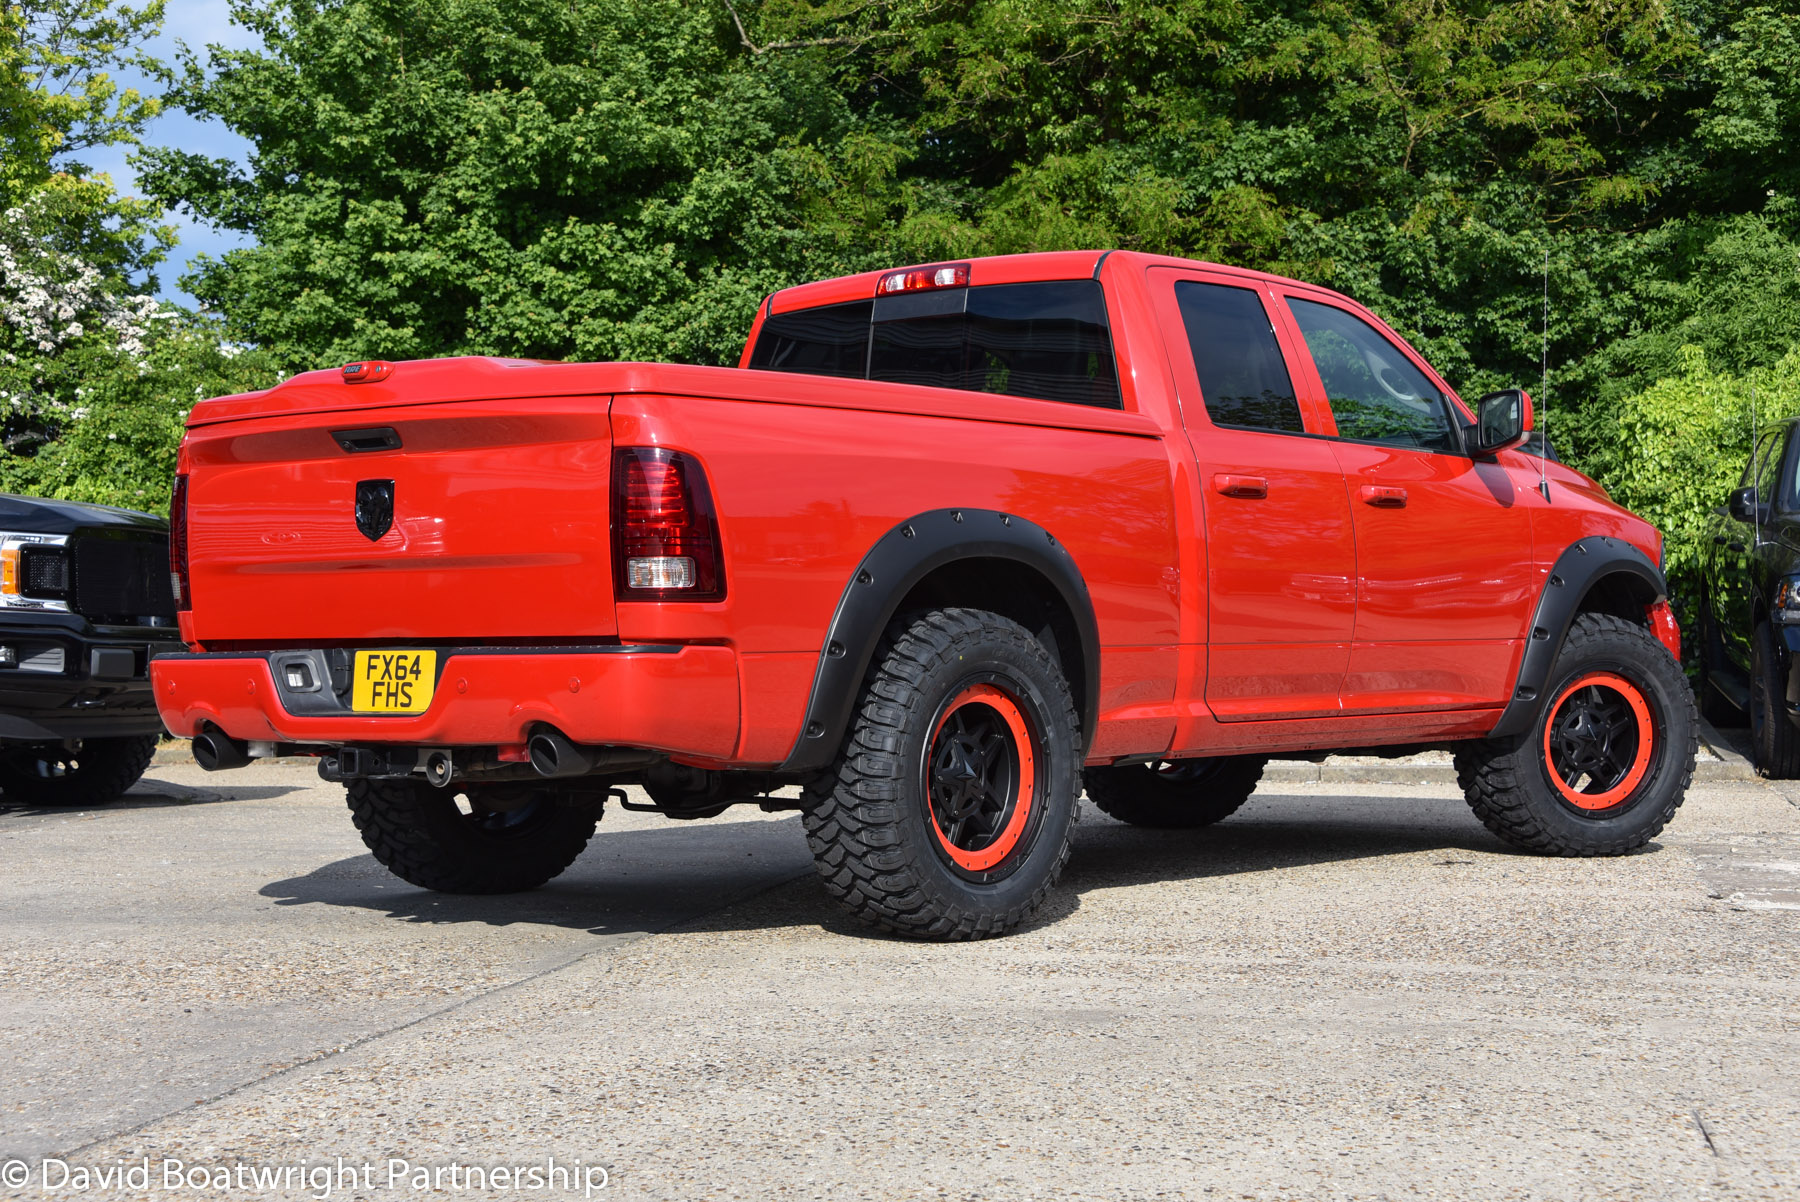 2014 Custom RAM for sale in the UK with Prins LPG